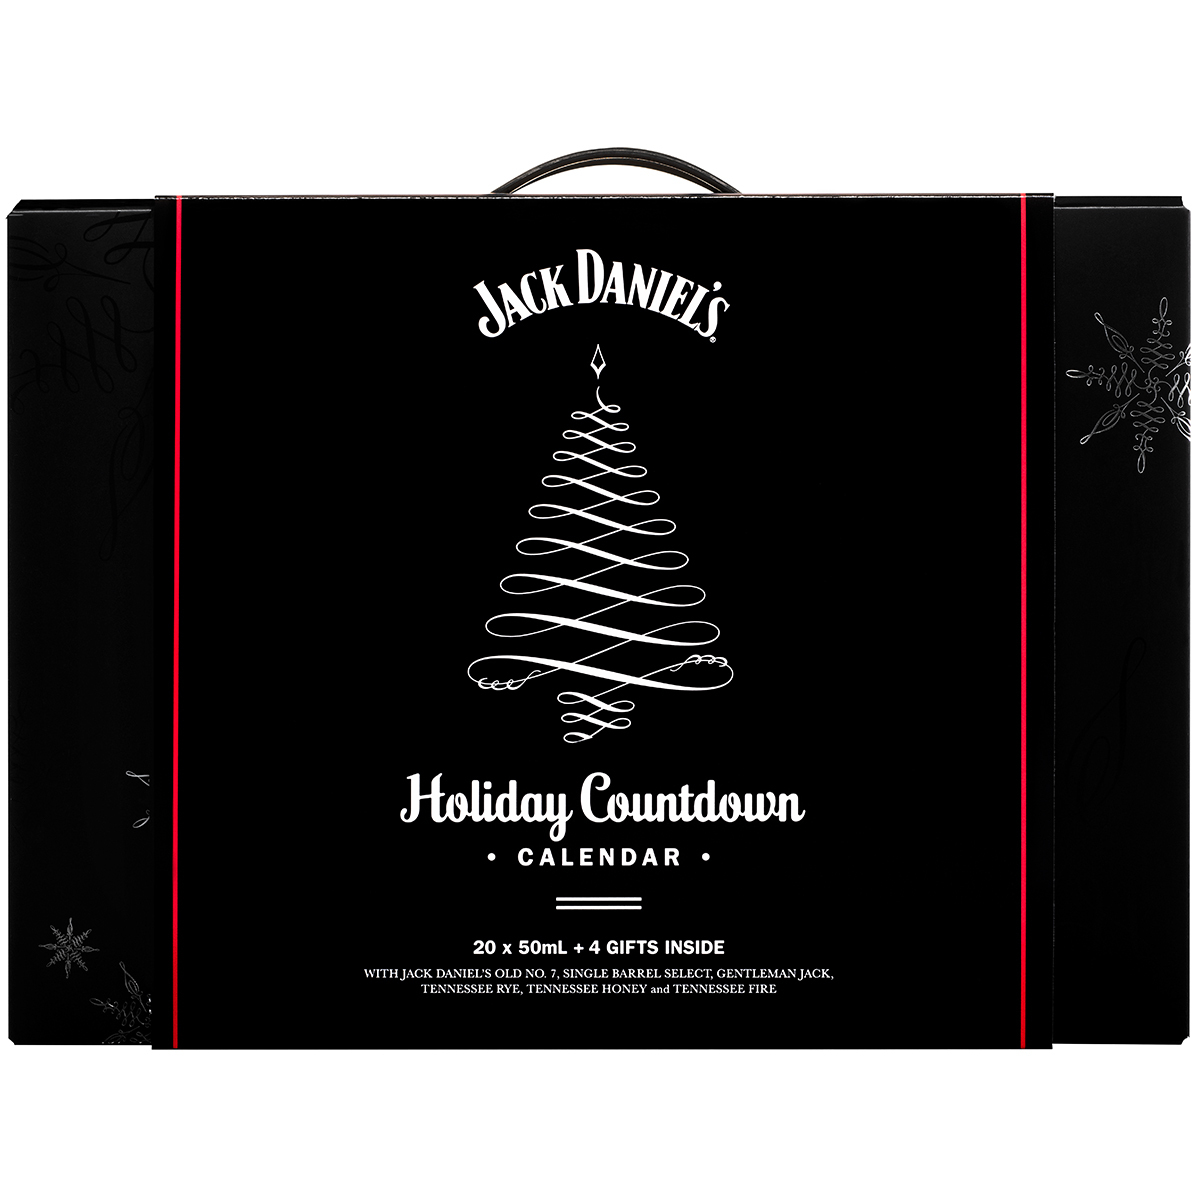 Jack Daniel's Tennessee Whiskey Holiday Countdown Calendar 20 X 50ml + 4 Gifts